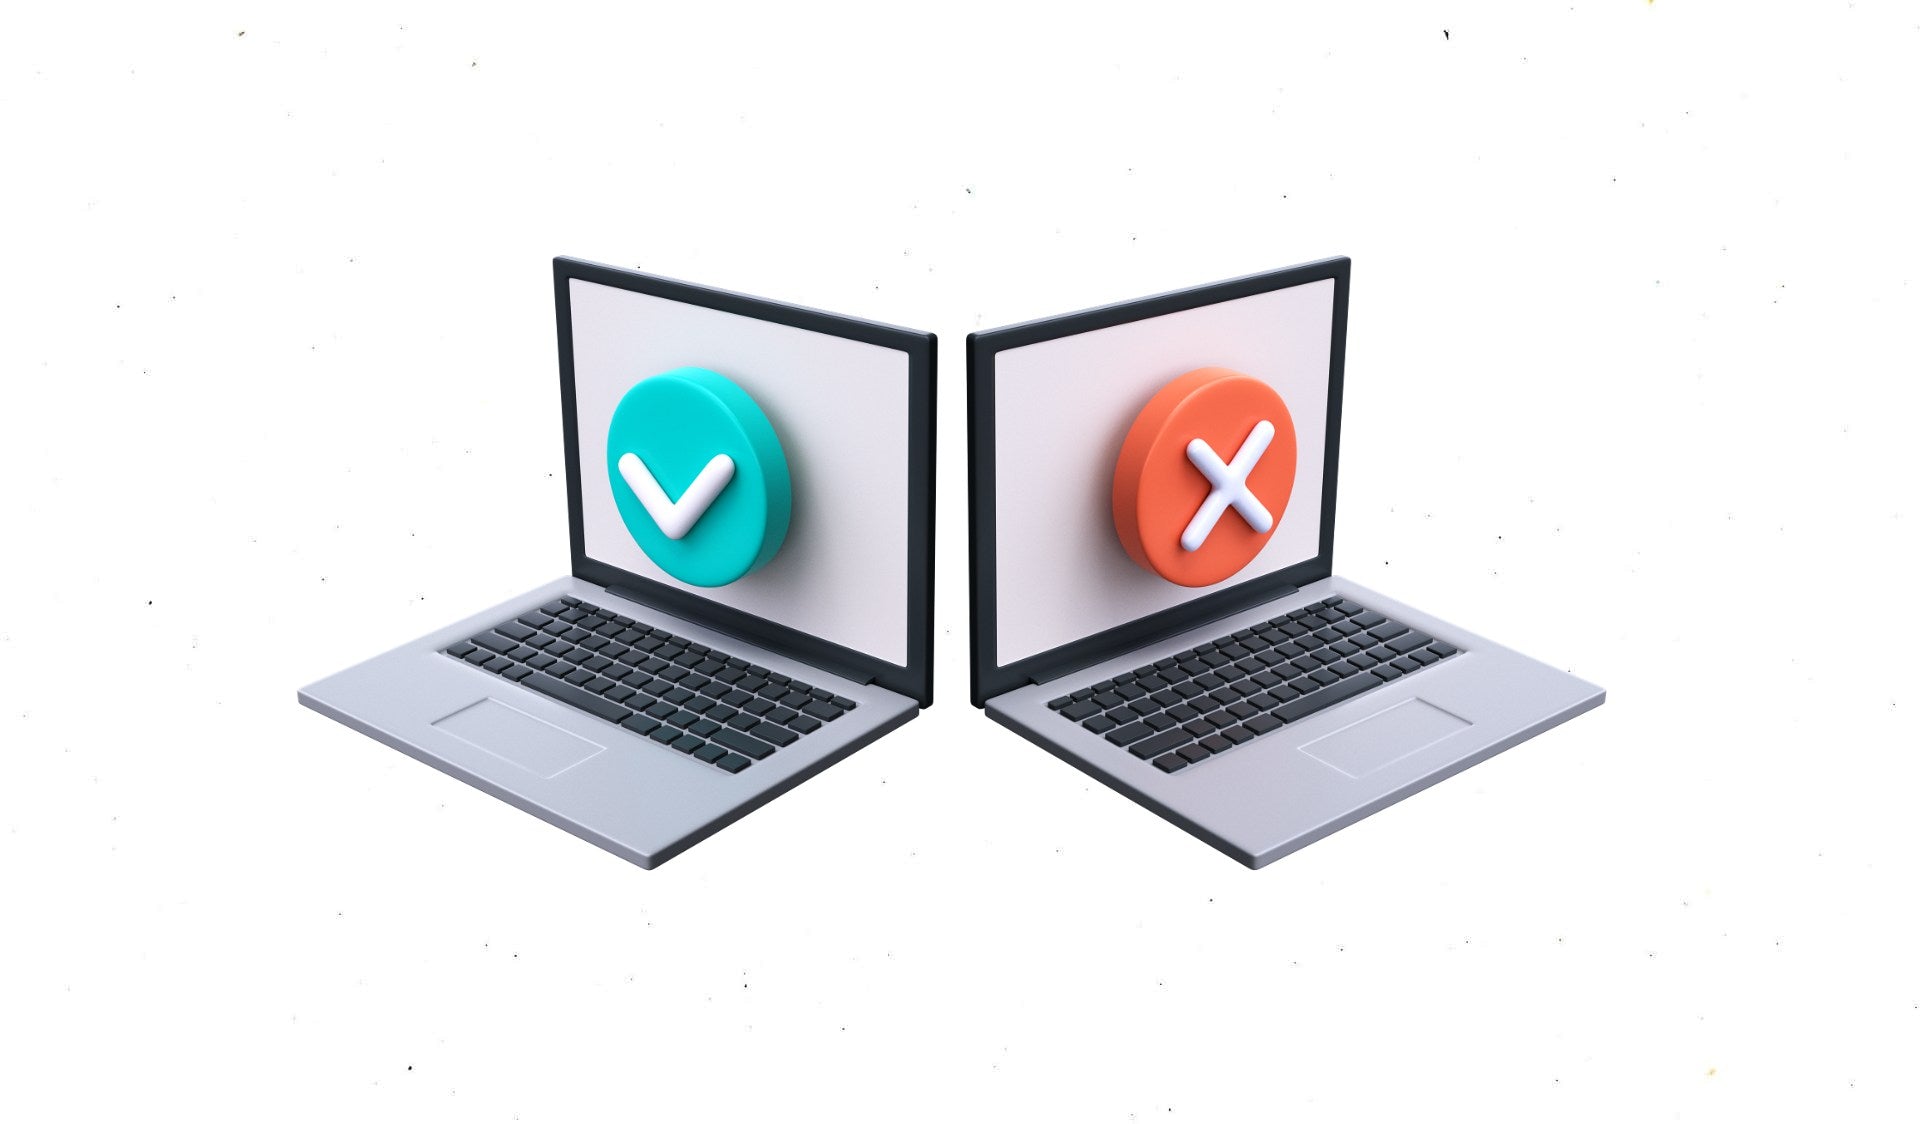 2 Laptops Screen With A Checkmark And A Cross